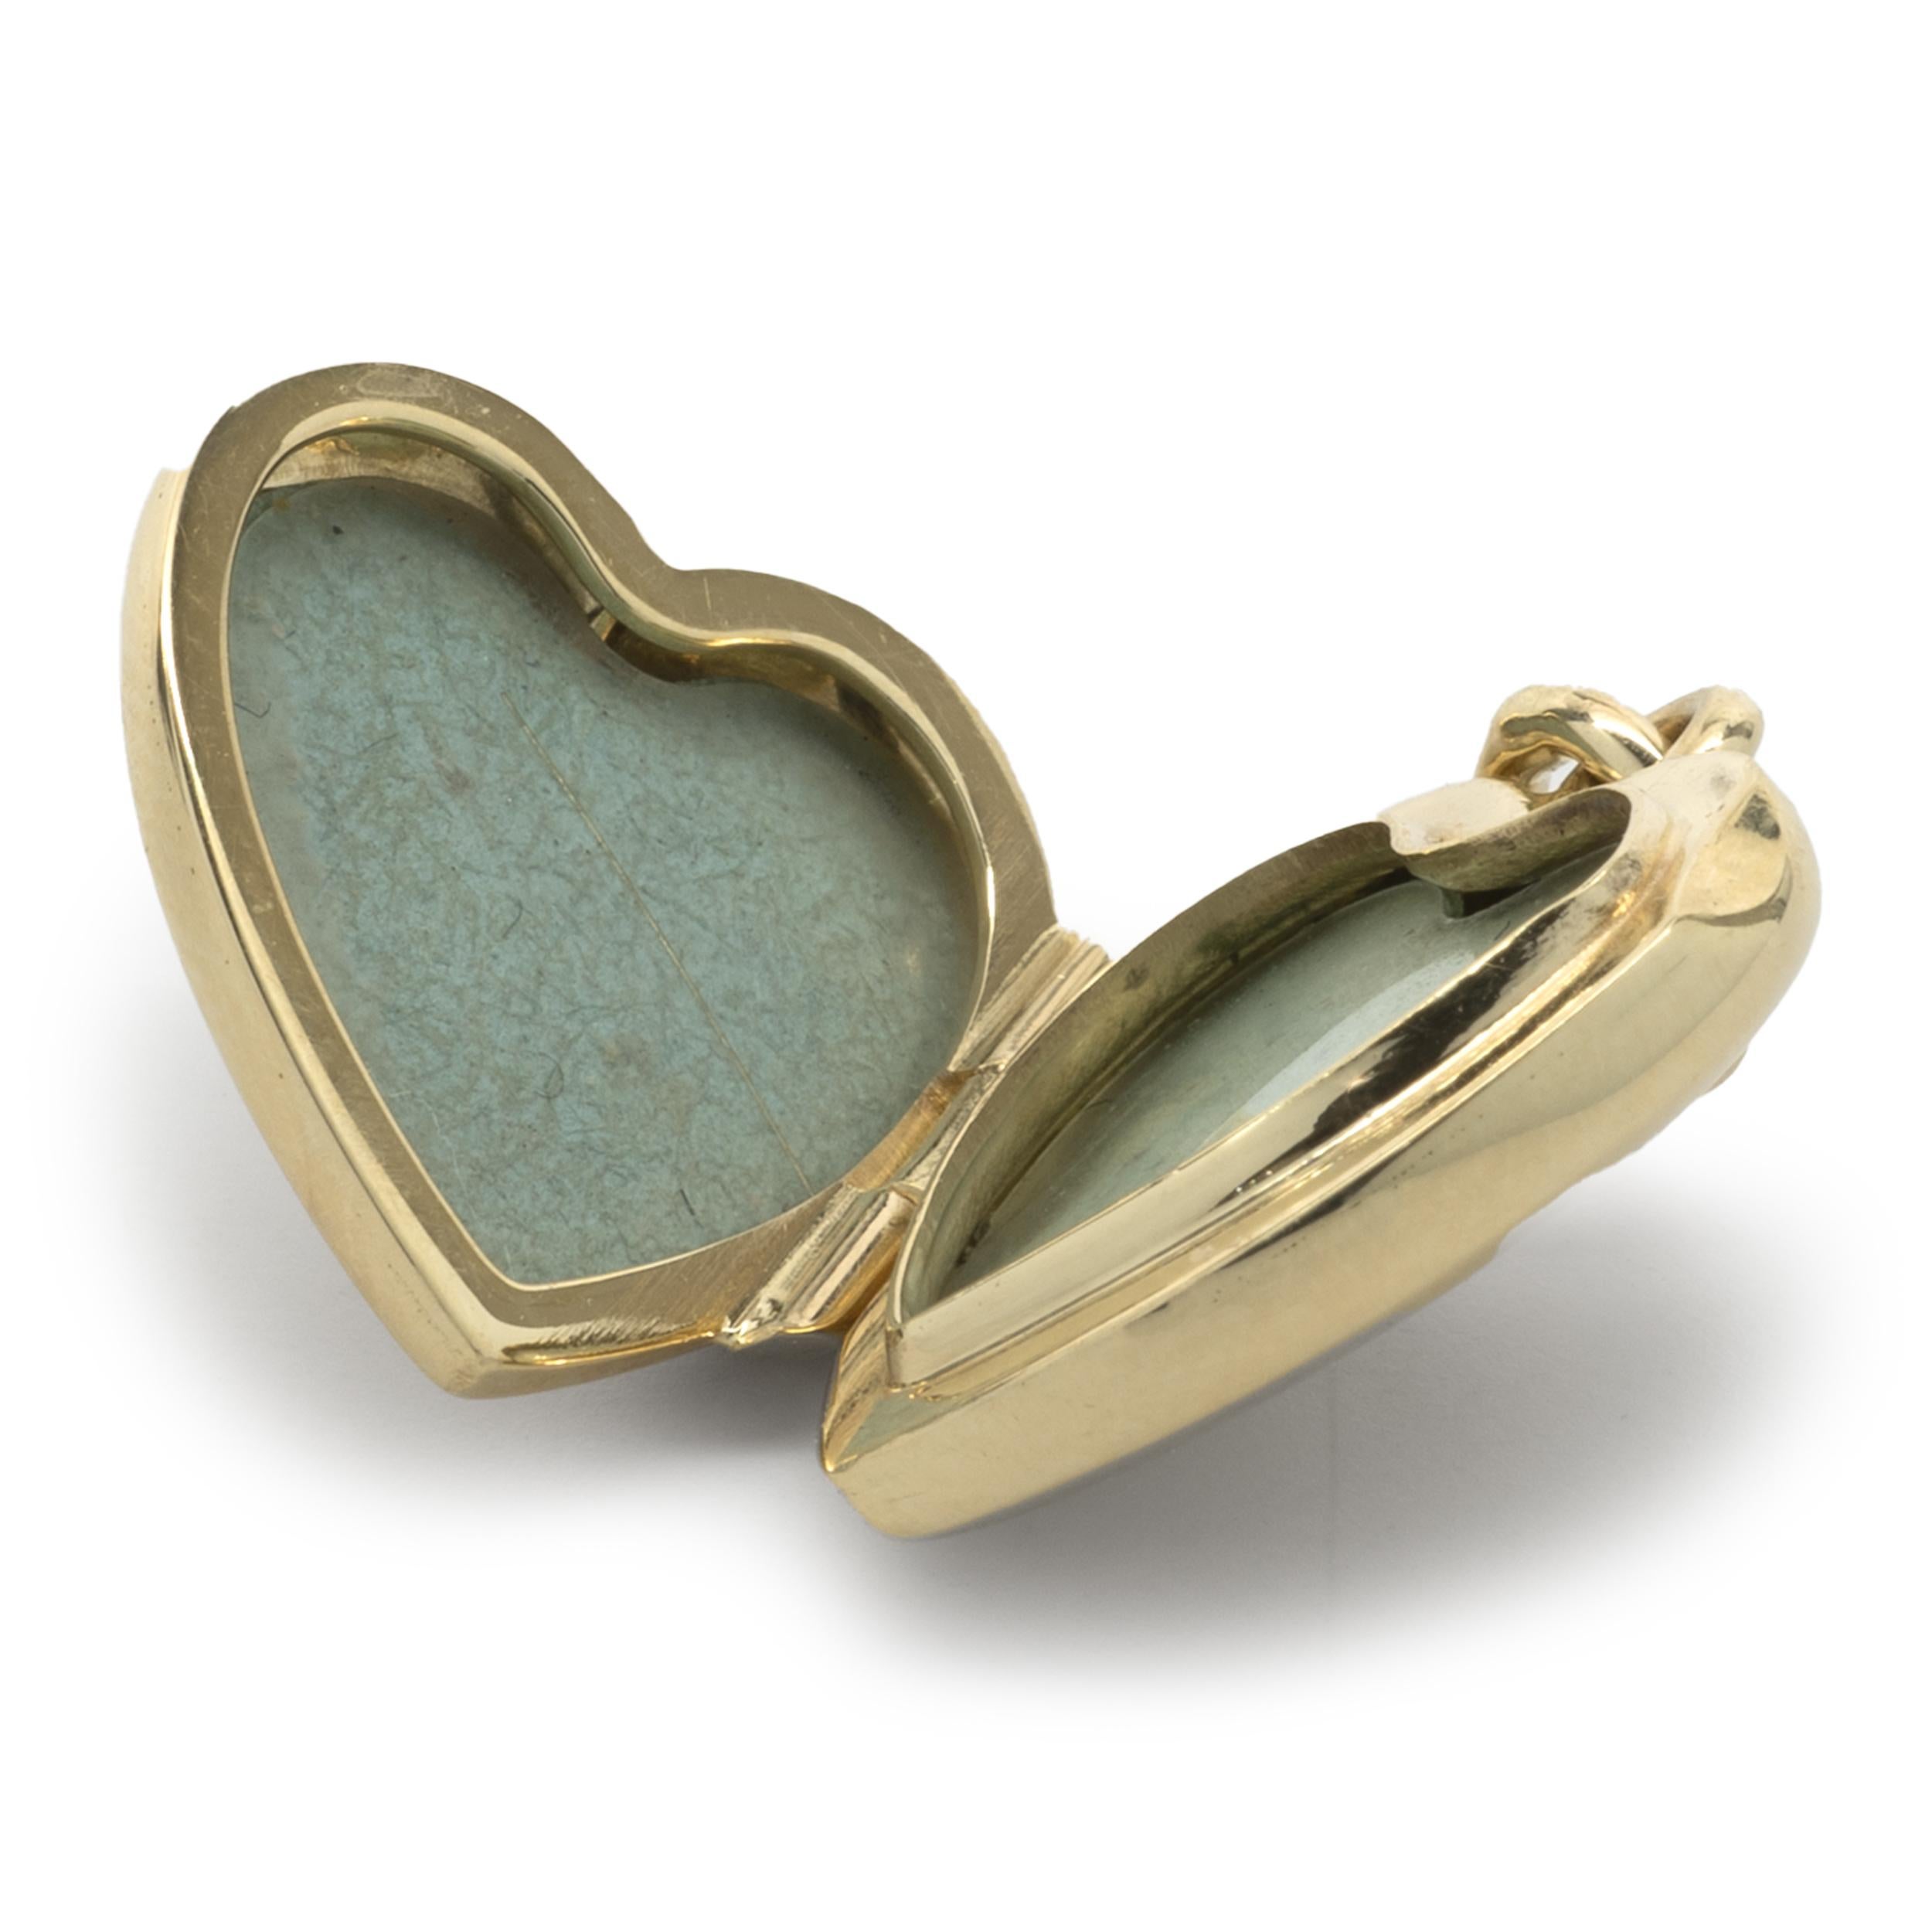 Designer: Tiffany & Co. 
Material: 18K yellow gold
Dimensions: locket measures 24 X 16.5mm
Weight: 5.24 grams
